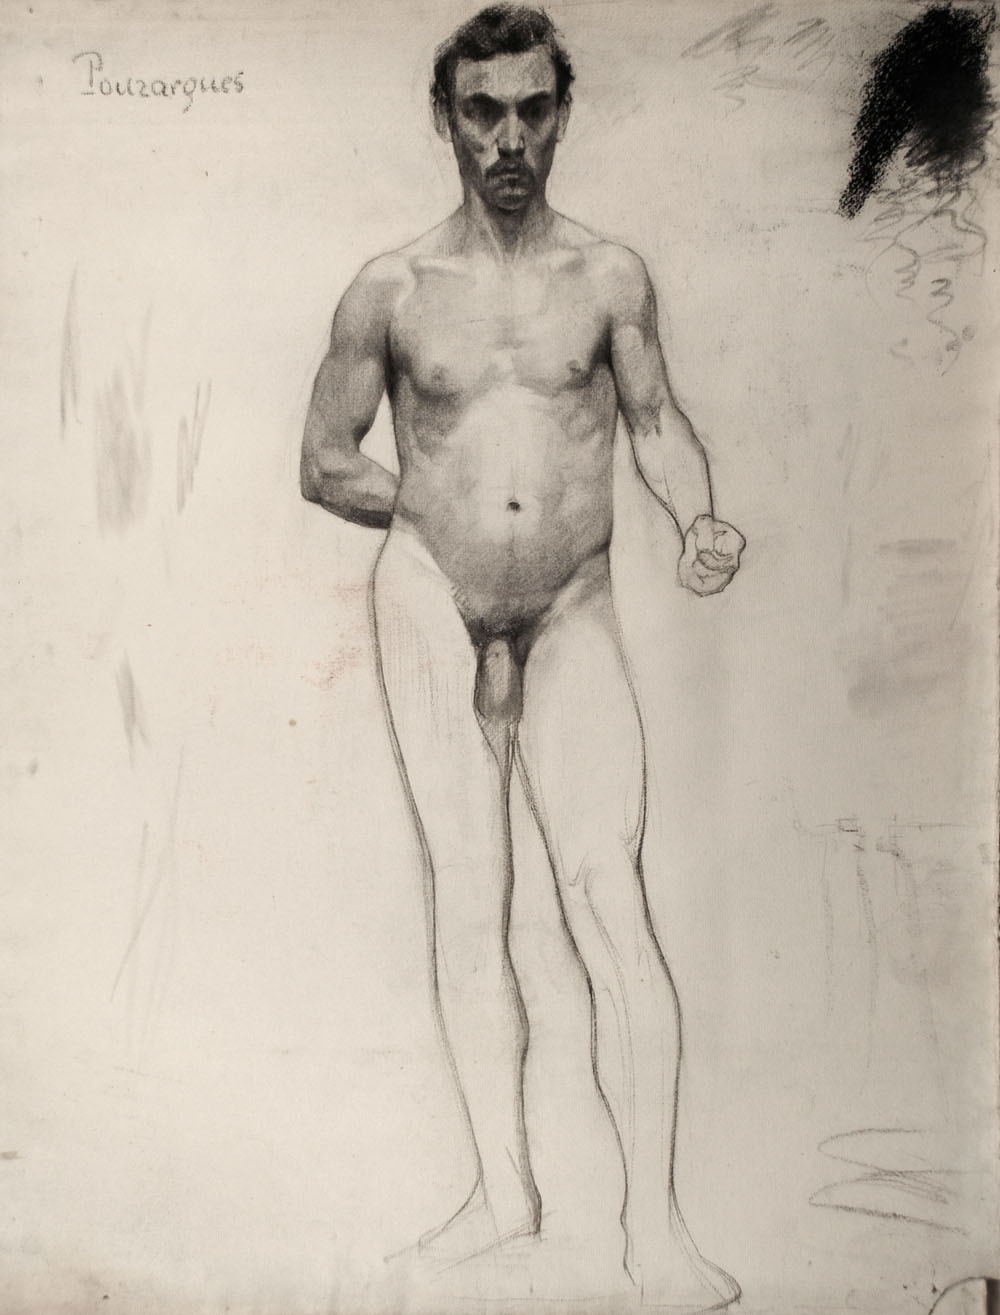 Lucien-Paul Pouzargues drawing male nude with clenched fist